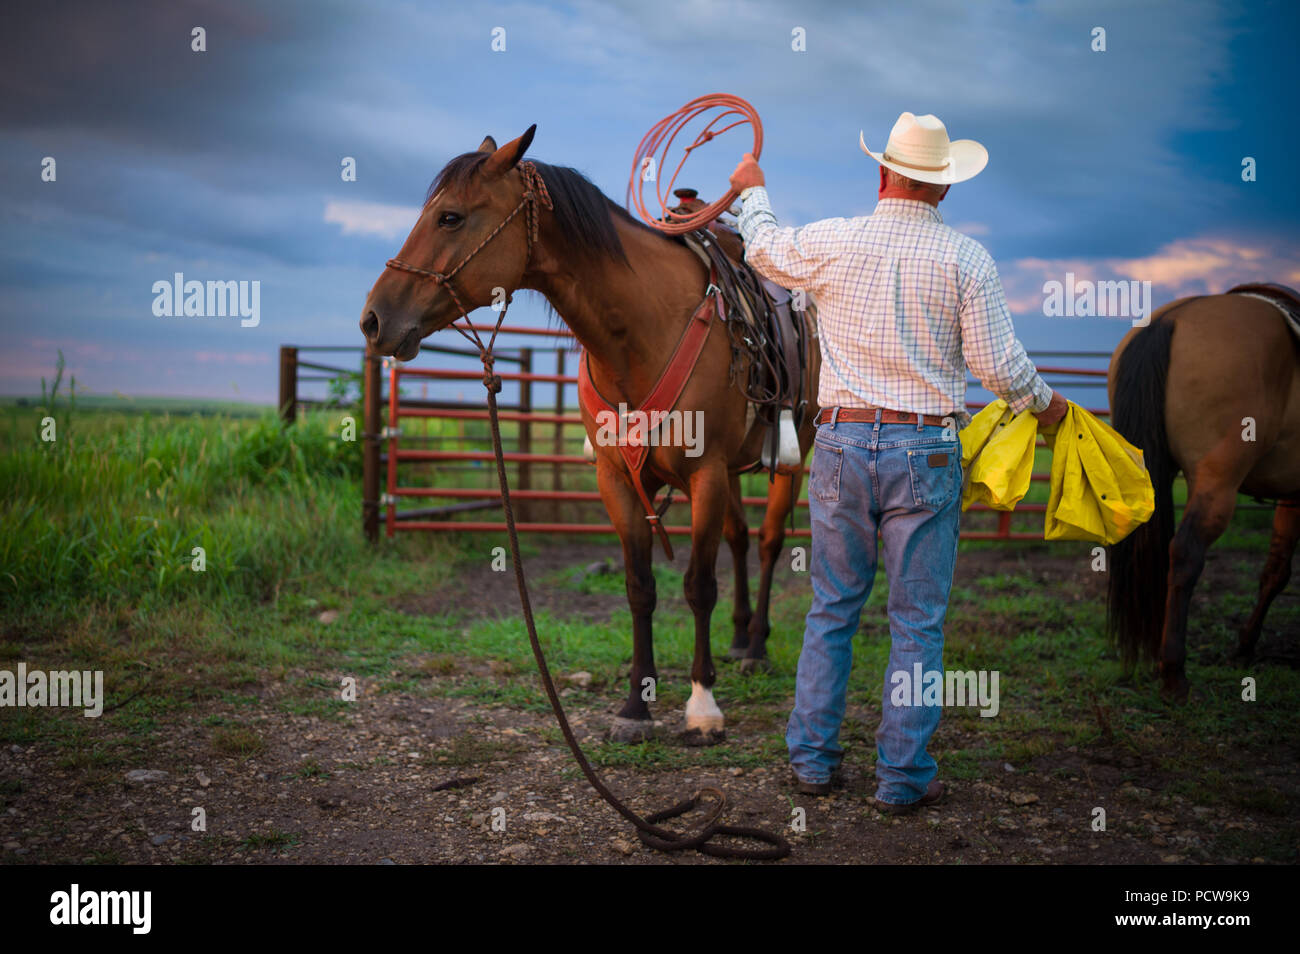 Cowboy preparing lasso and horse to get ready to round up cattle on a ranch, Flint Hills, Kansas, USA. Stock Photo